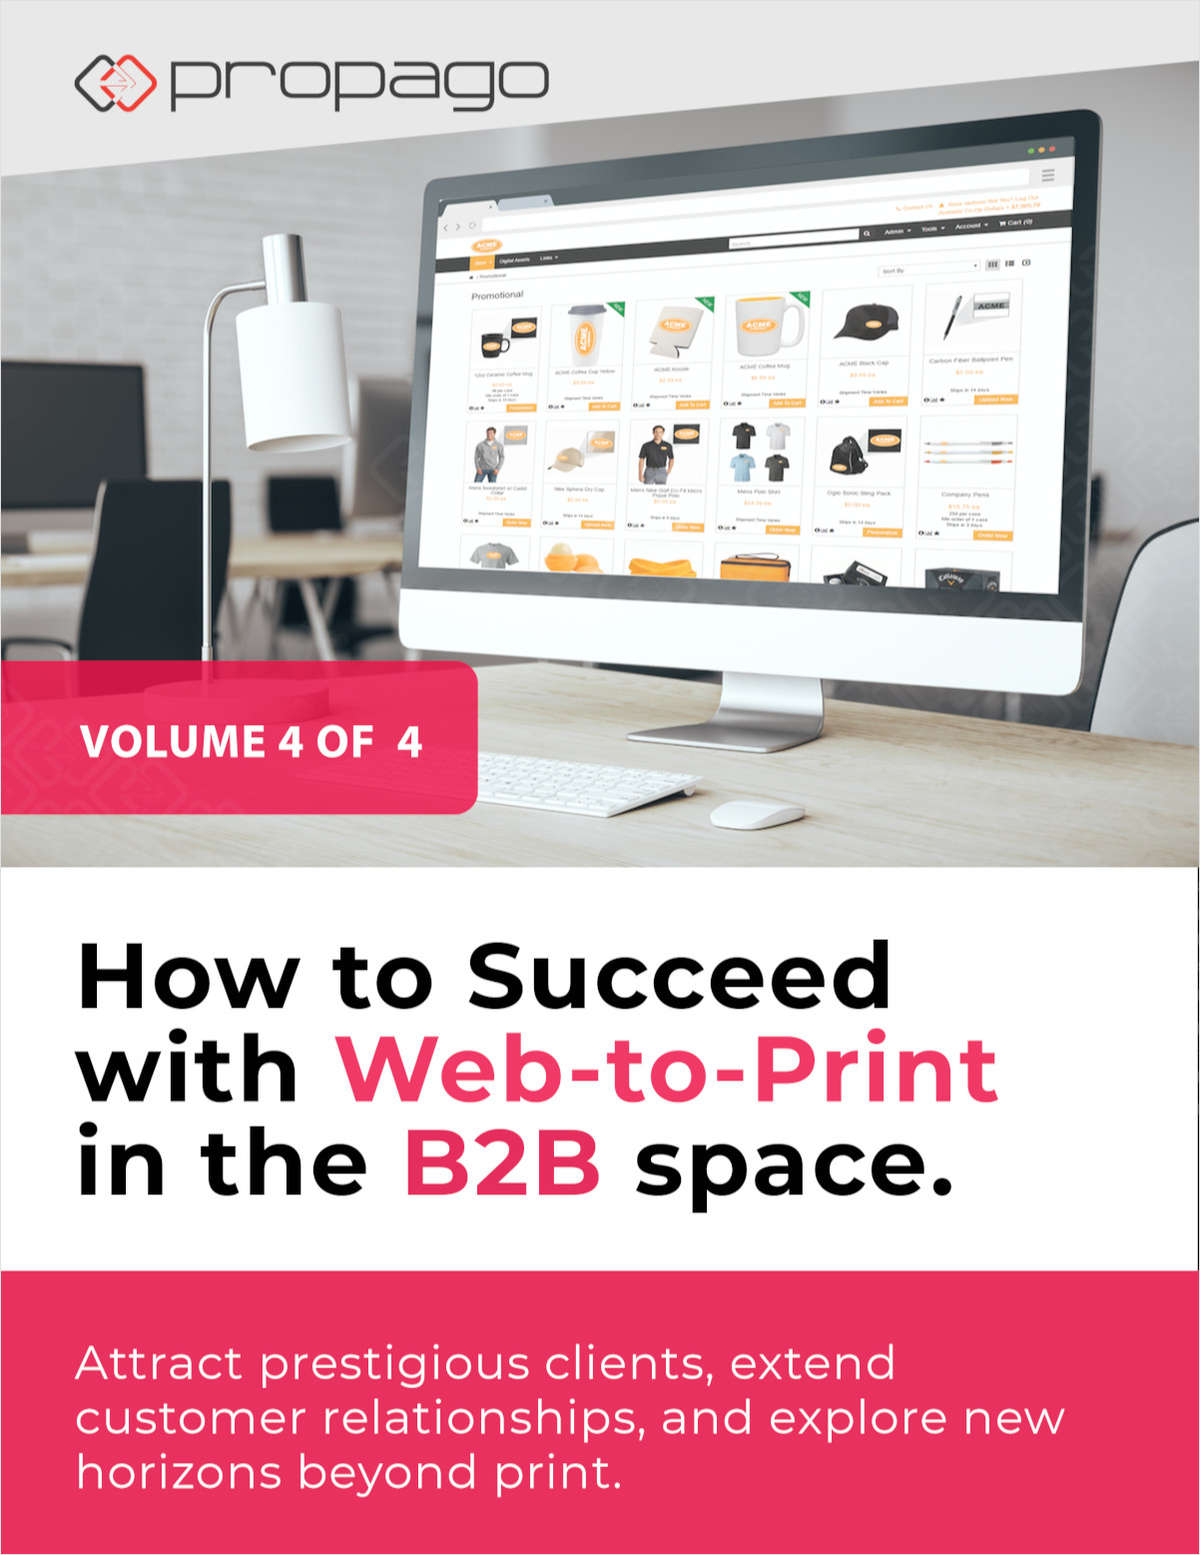 How to Succeed with Web-to-Print in the B2B Space